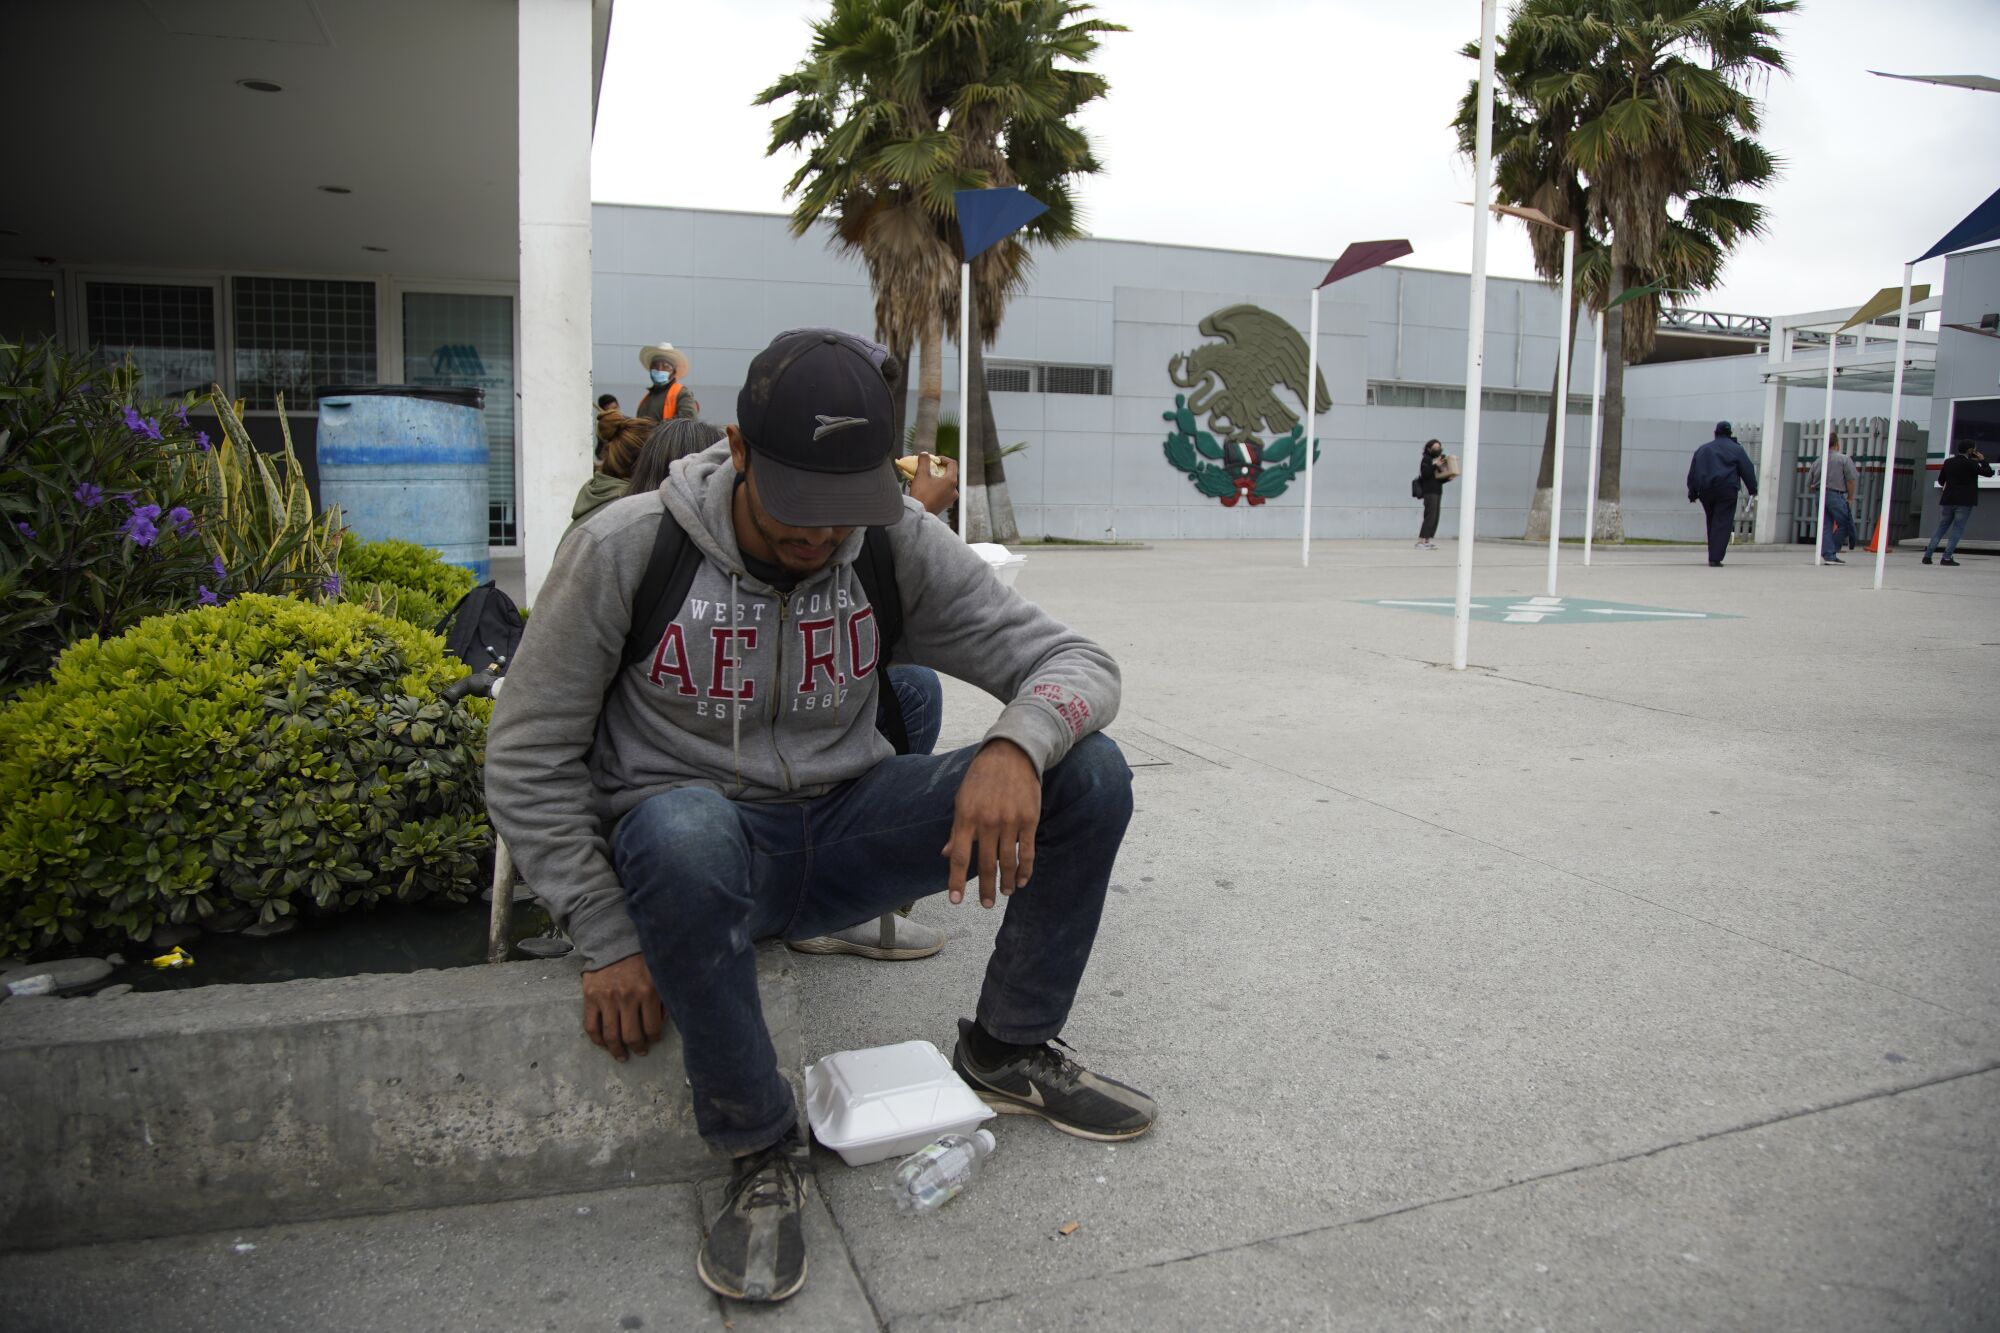 Francisco sits near the pedestrian border crossing to eat lunch from a foam container at his feet